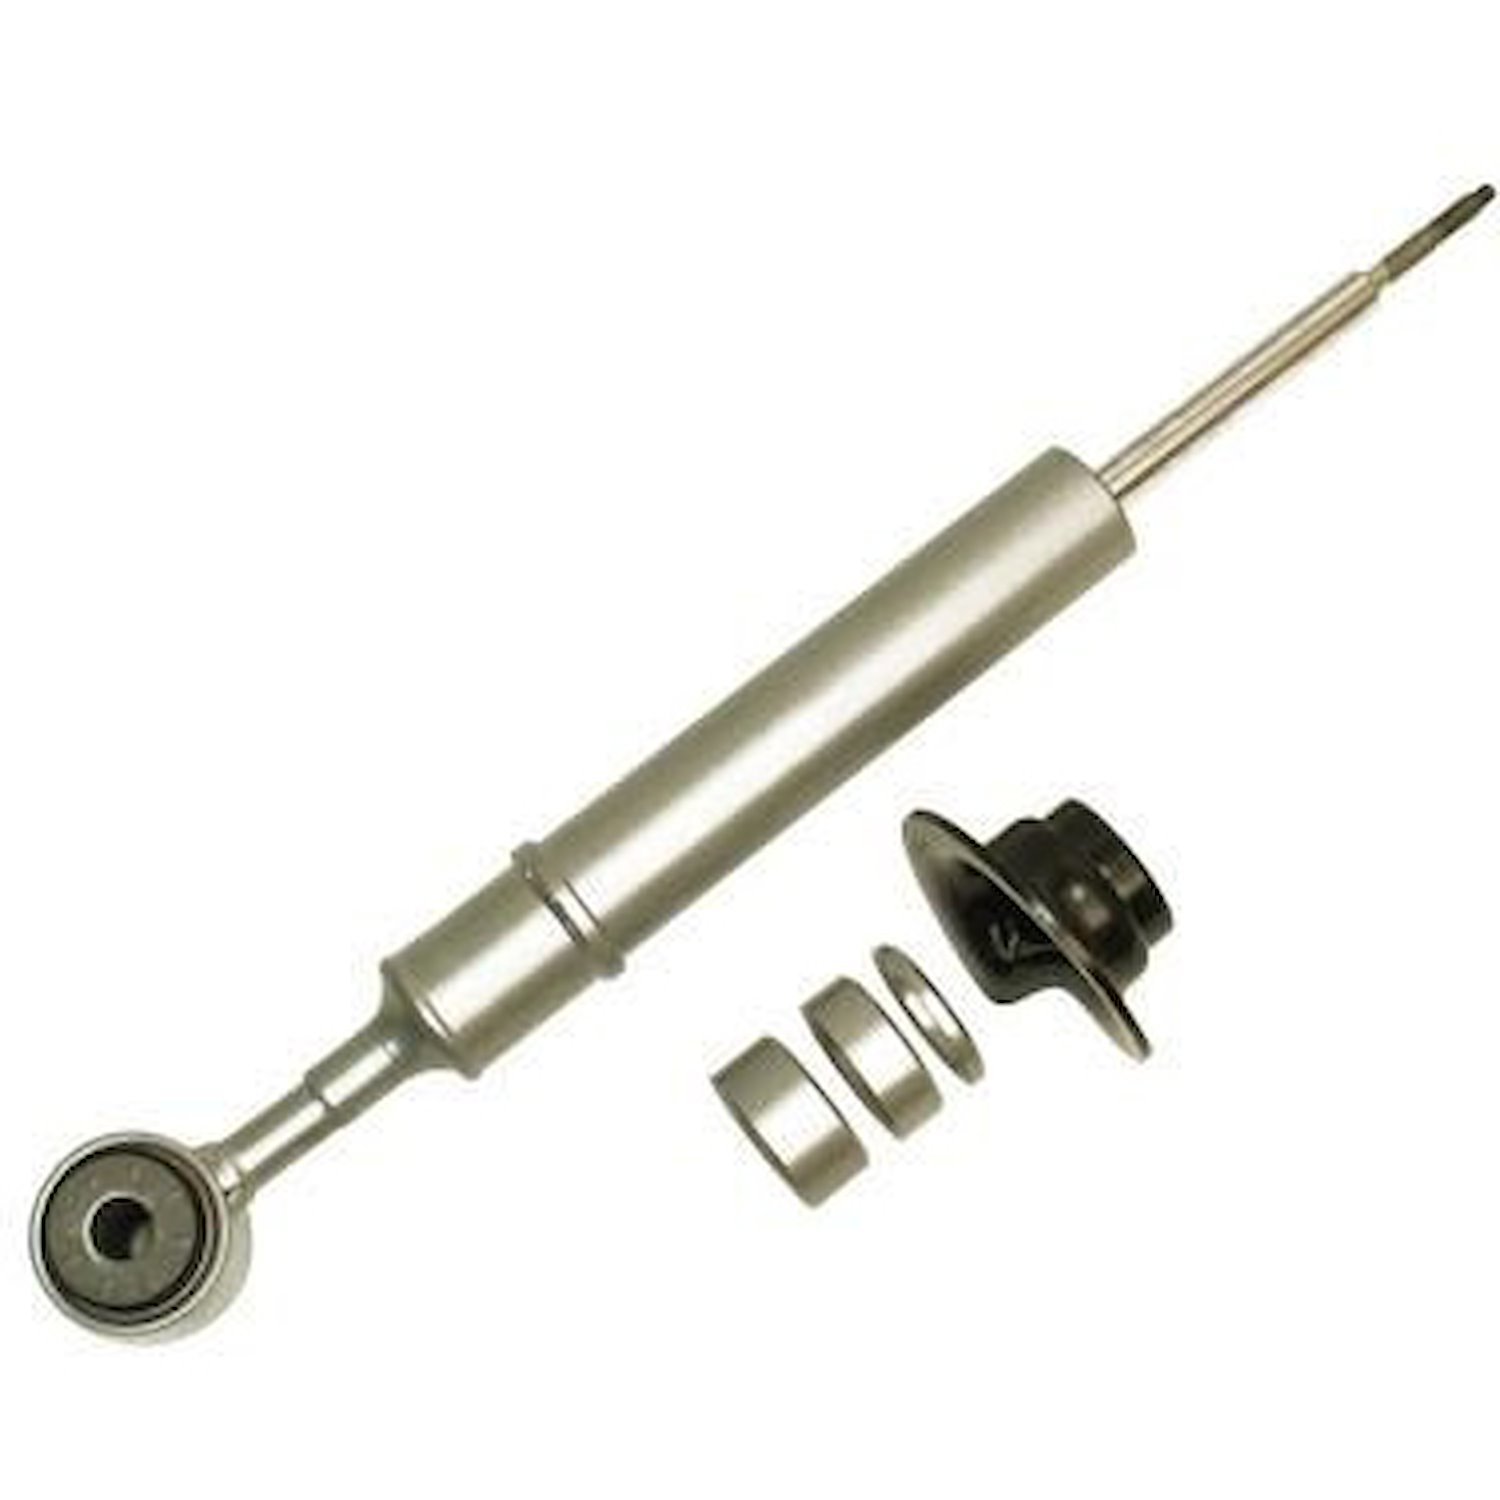 Street Performance OEM Shock for 2004-2013 Ford F-150 4WD